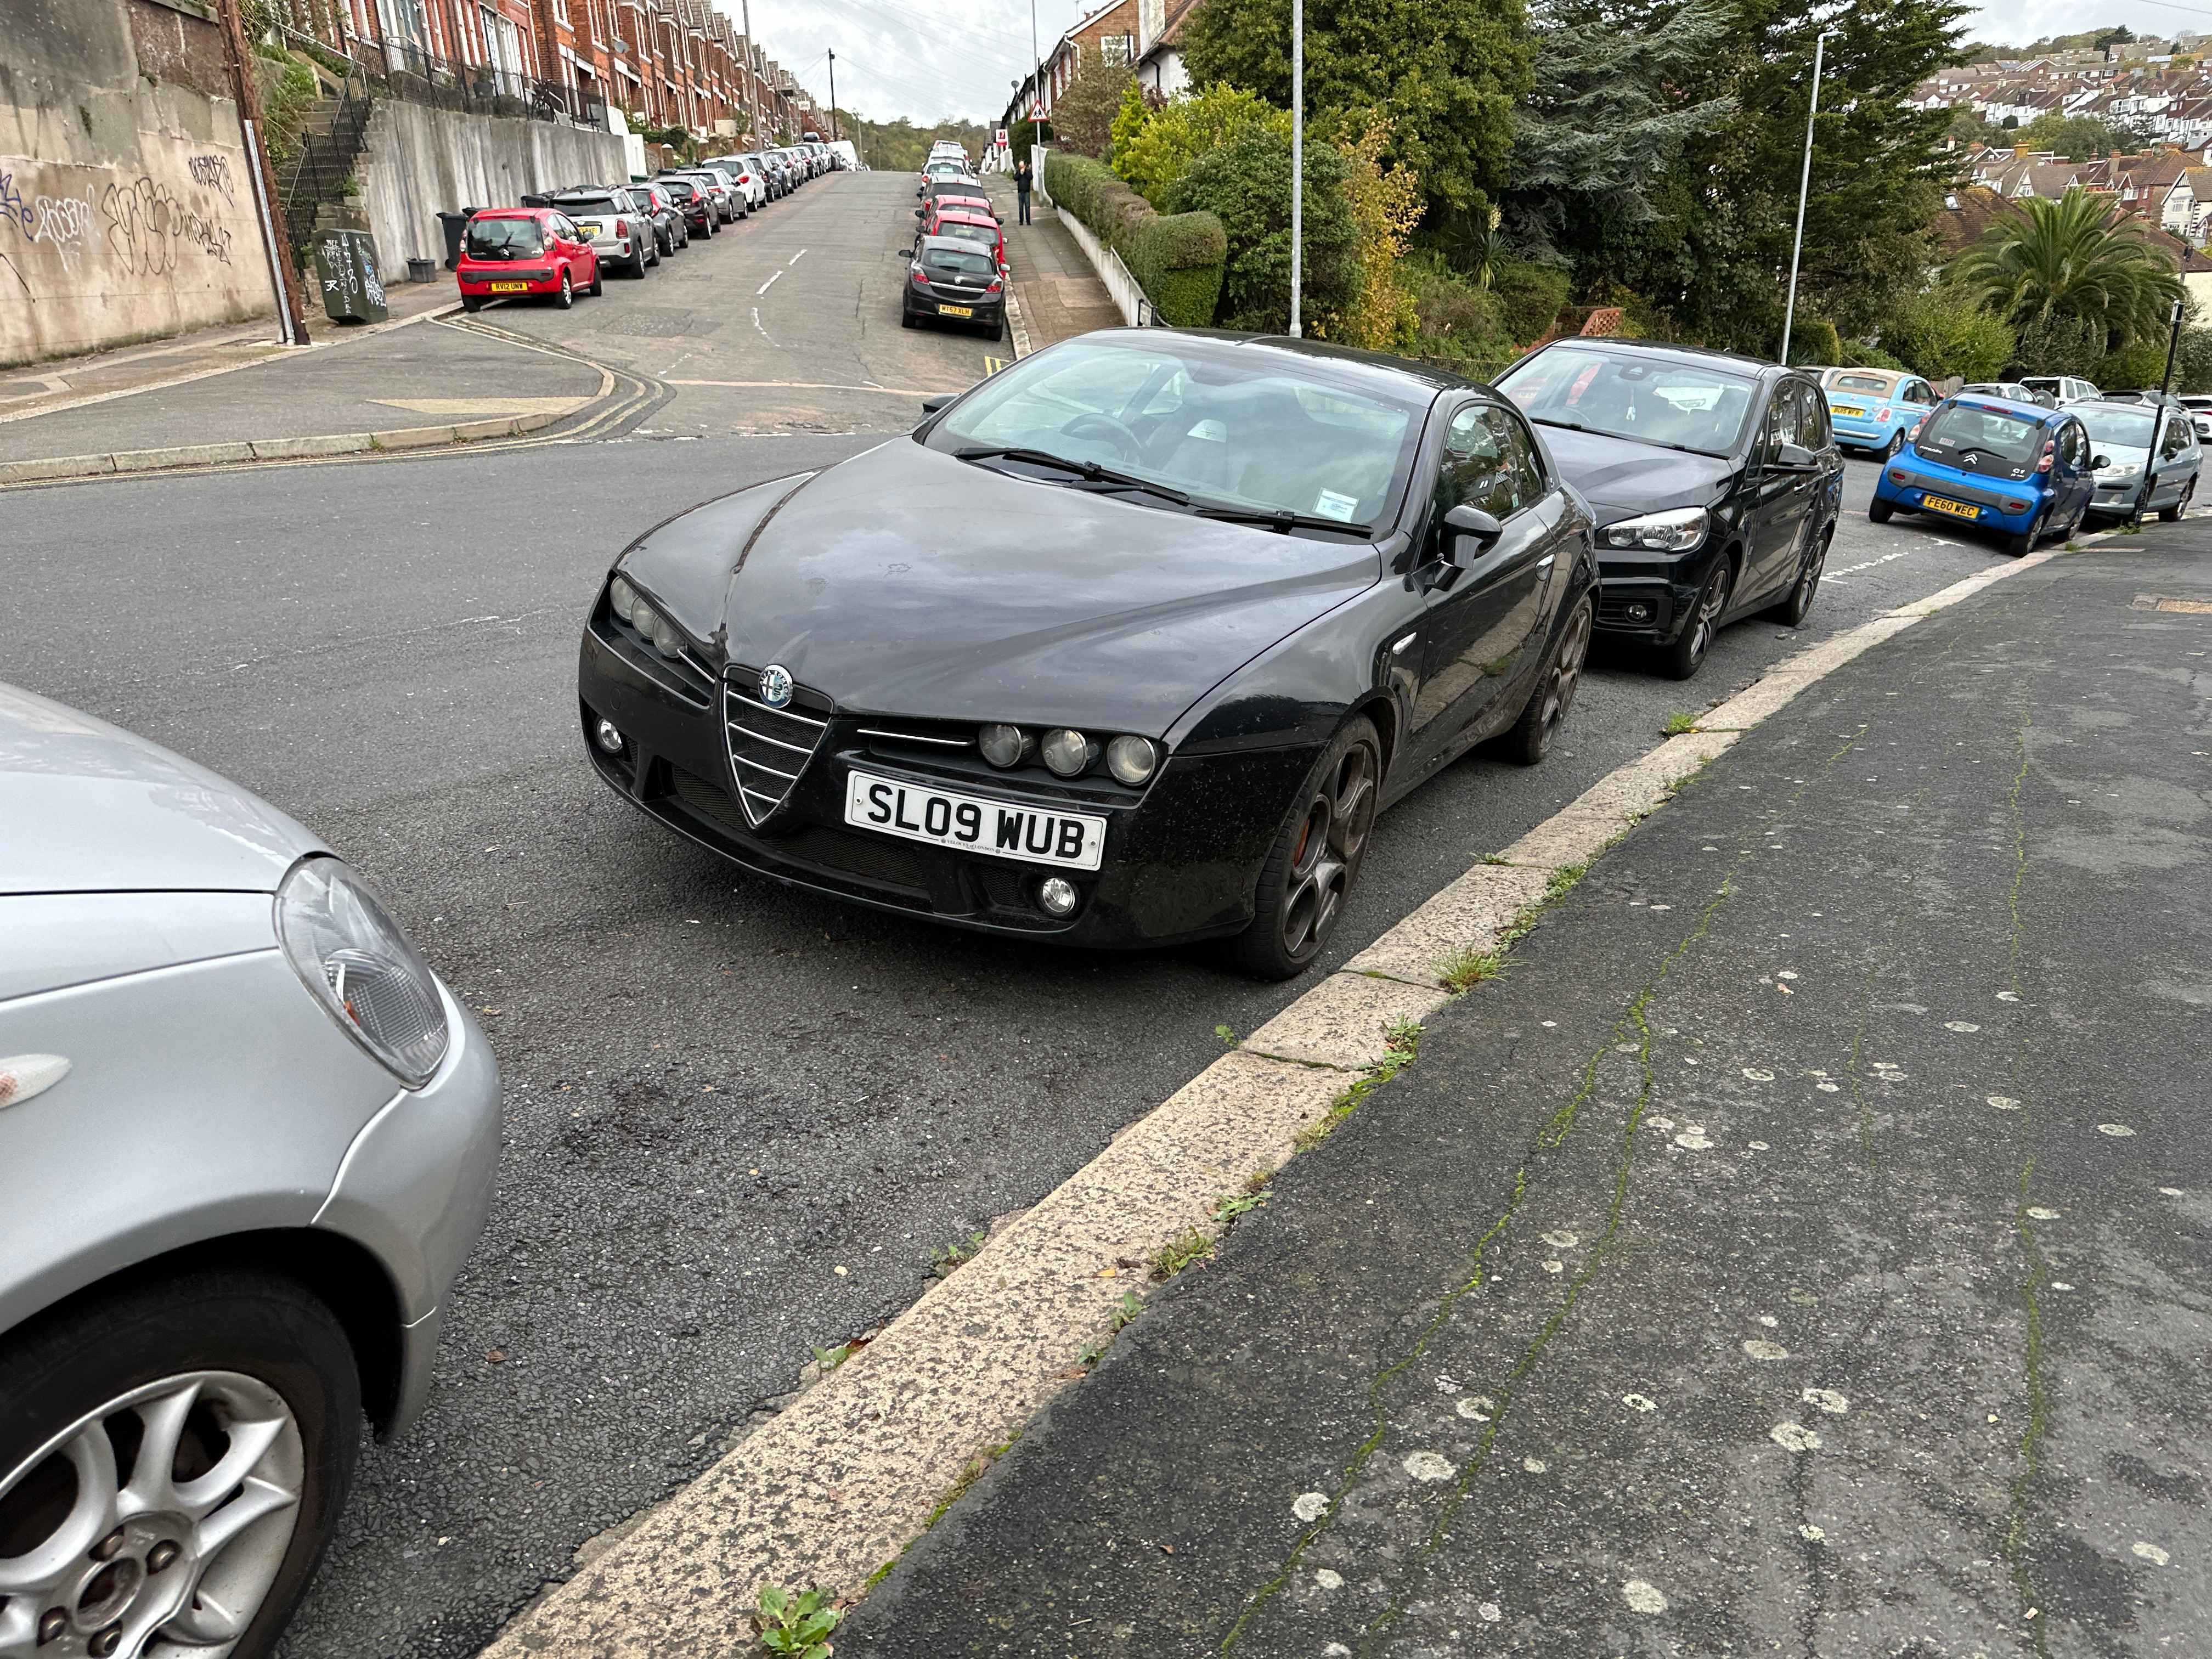 Photograph of SL09 WUB - a Black Alfa Romeo Brera parked in Hollingdean by a non-resident. The ninth of twenty photographs supplied by the residents of Hollingdean.